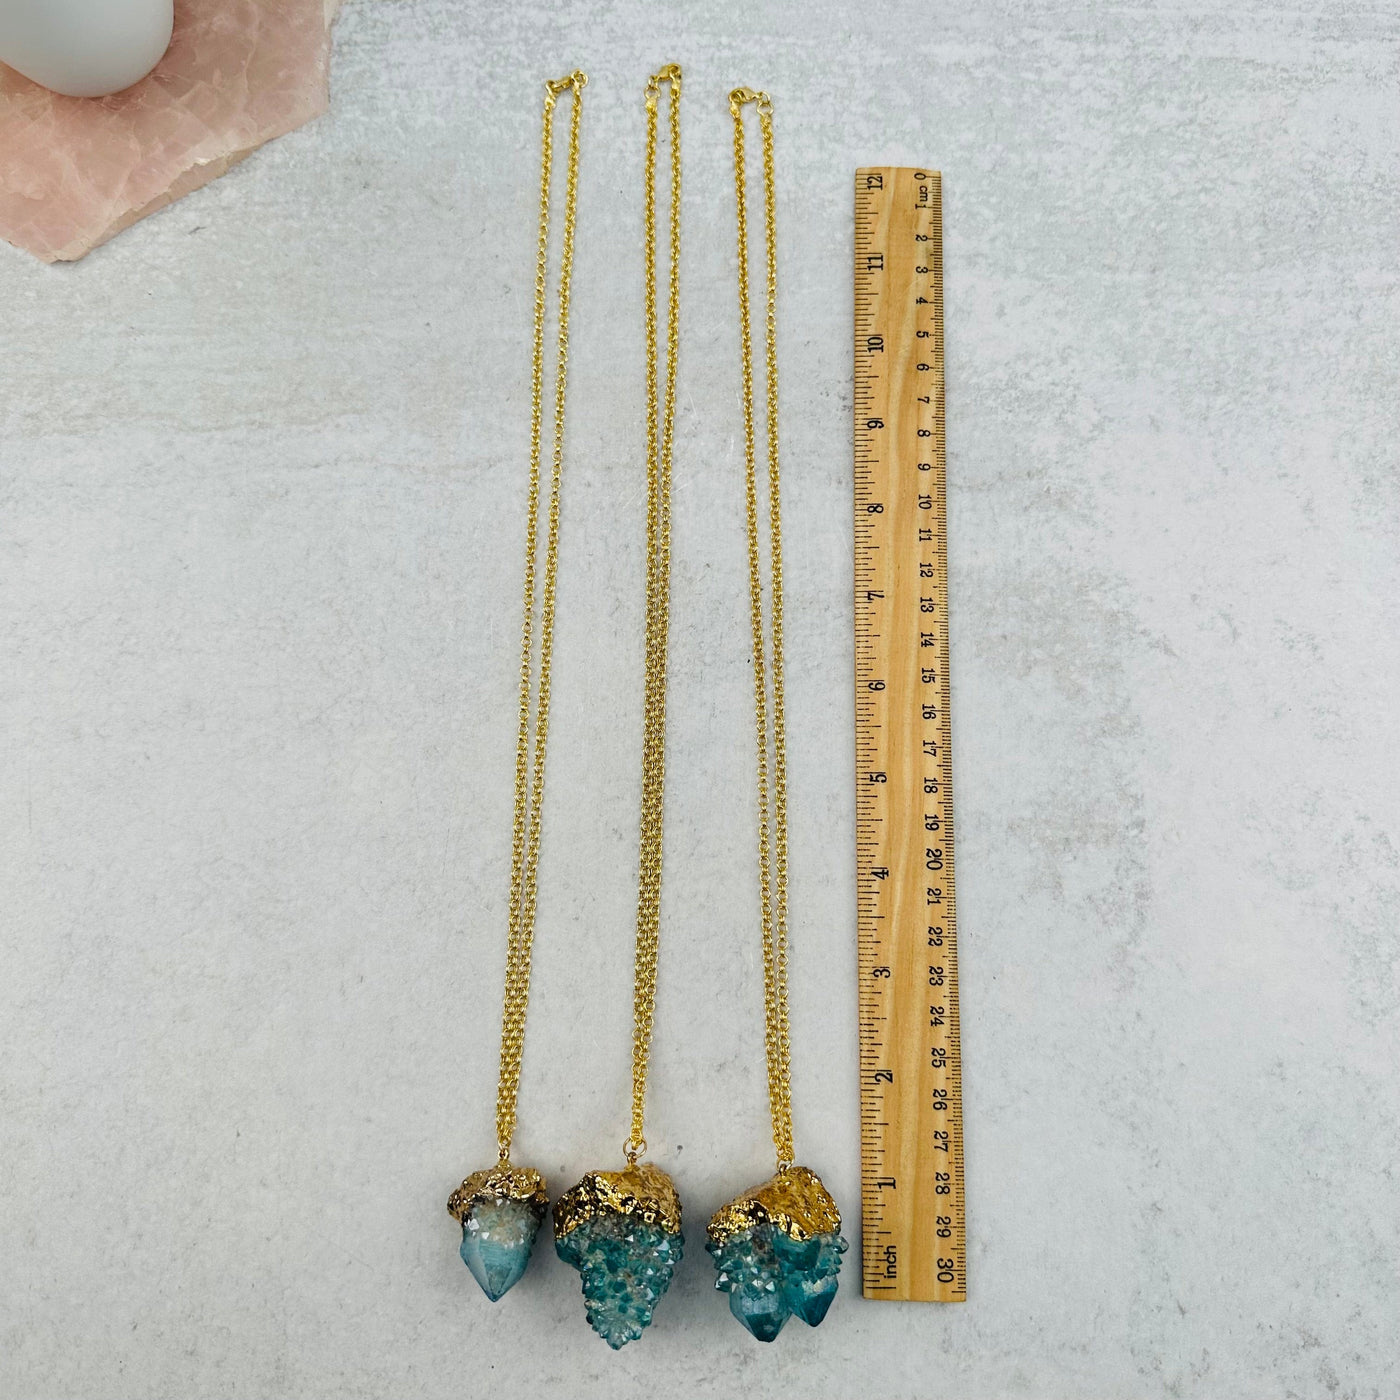 necklaces next to a ruler for size reference